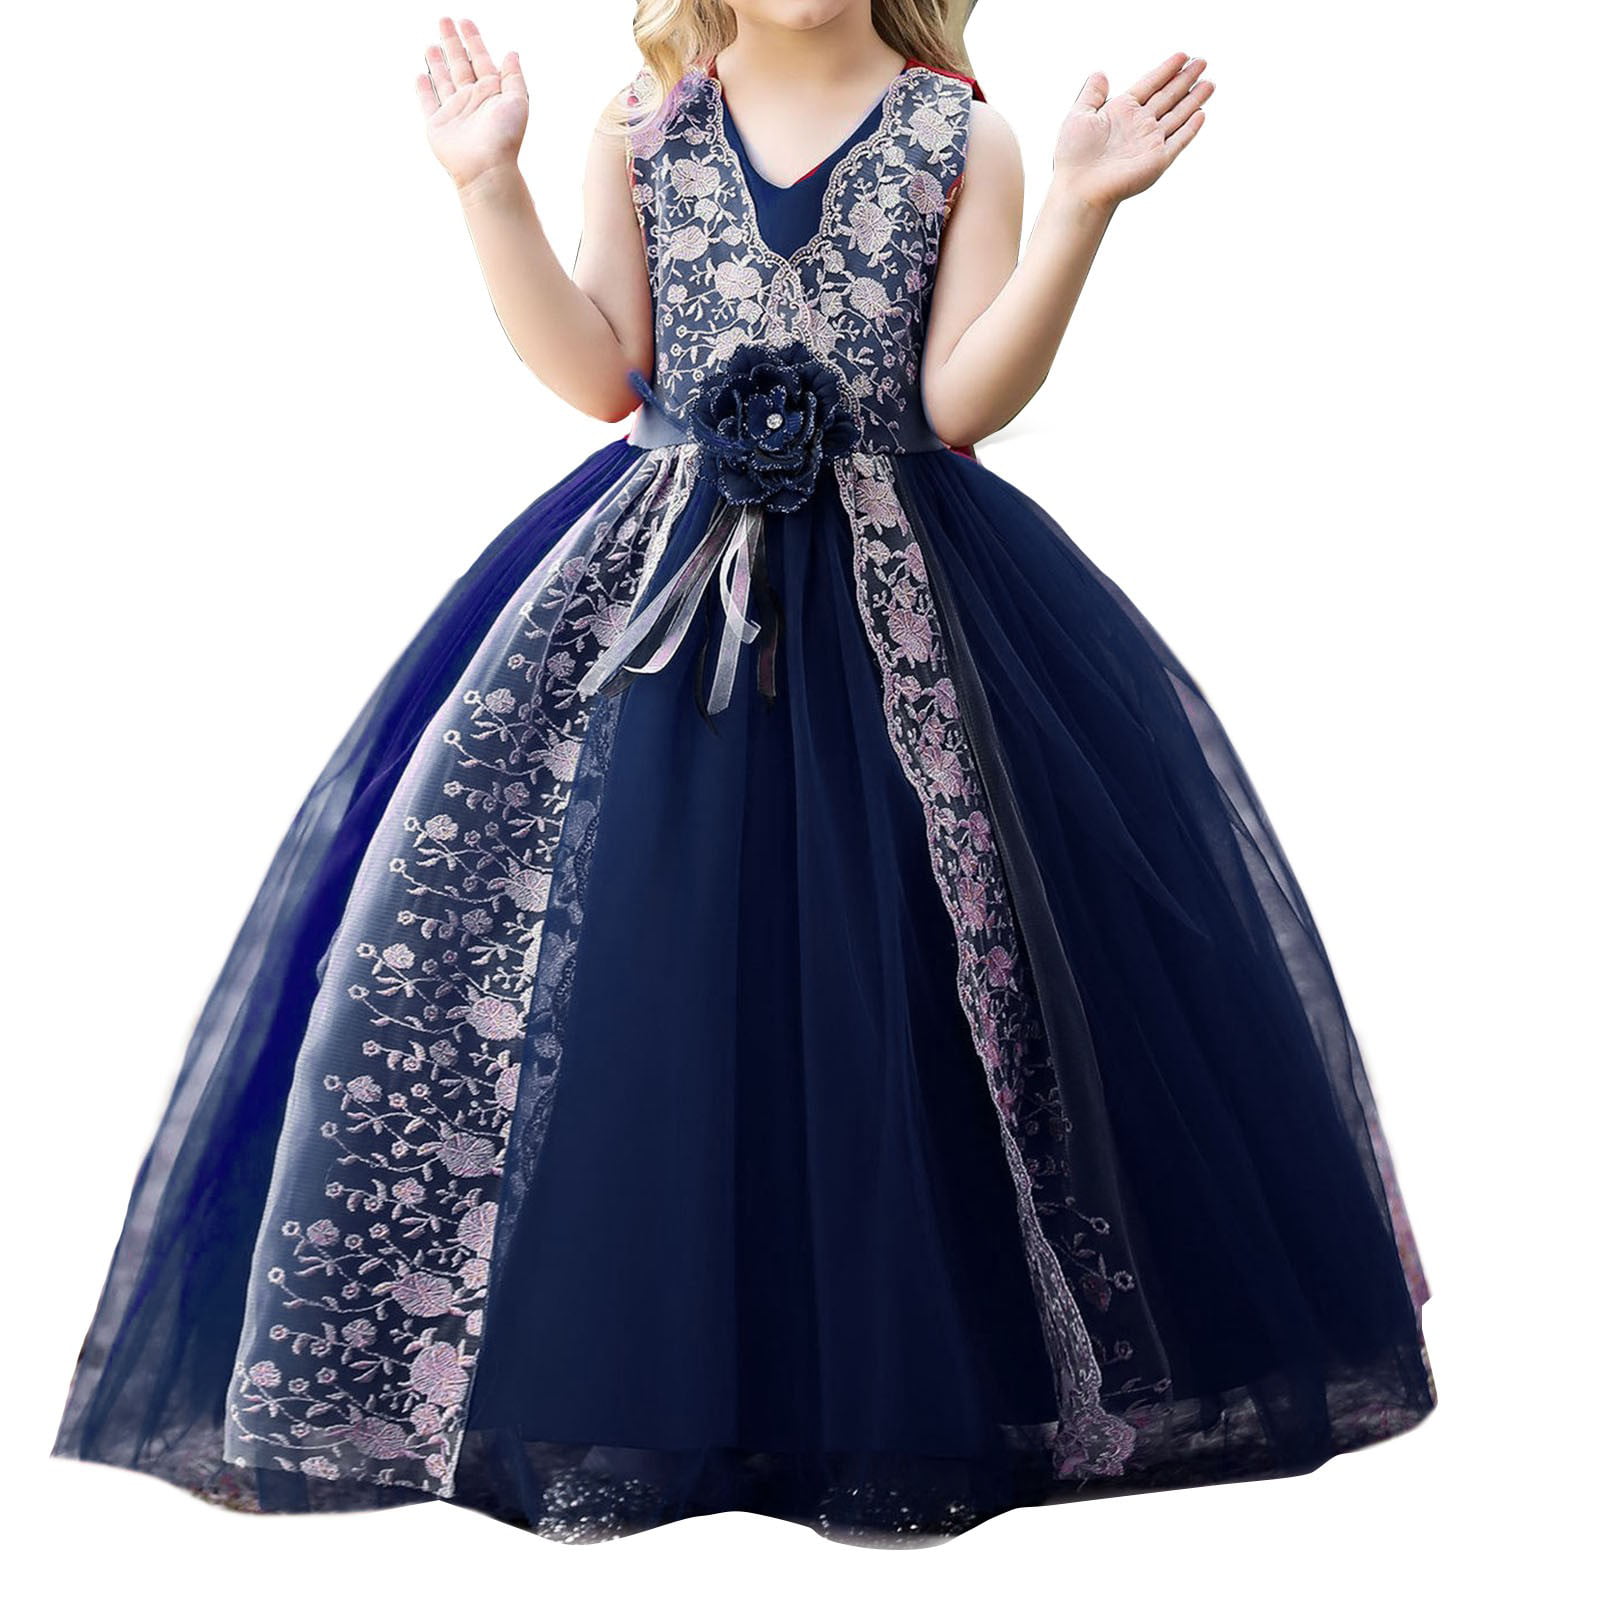 Buy Cutecumber Girls Ball Gown Online at Low Prices in India - Paytmmall.com